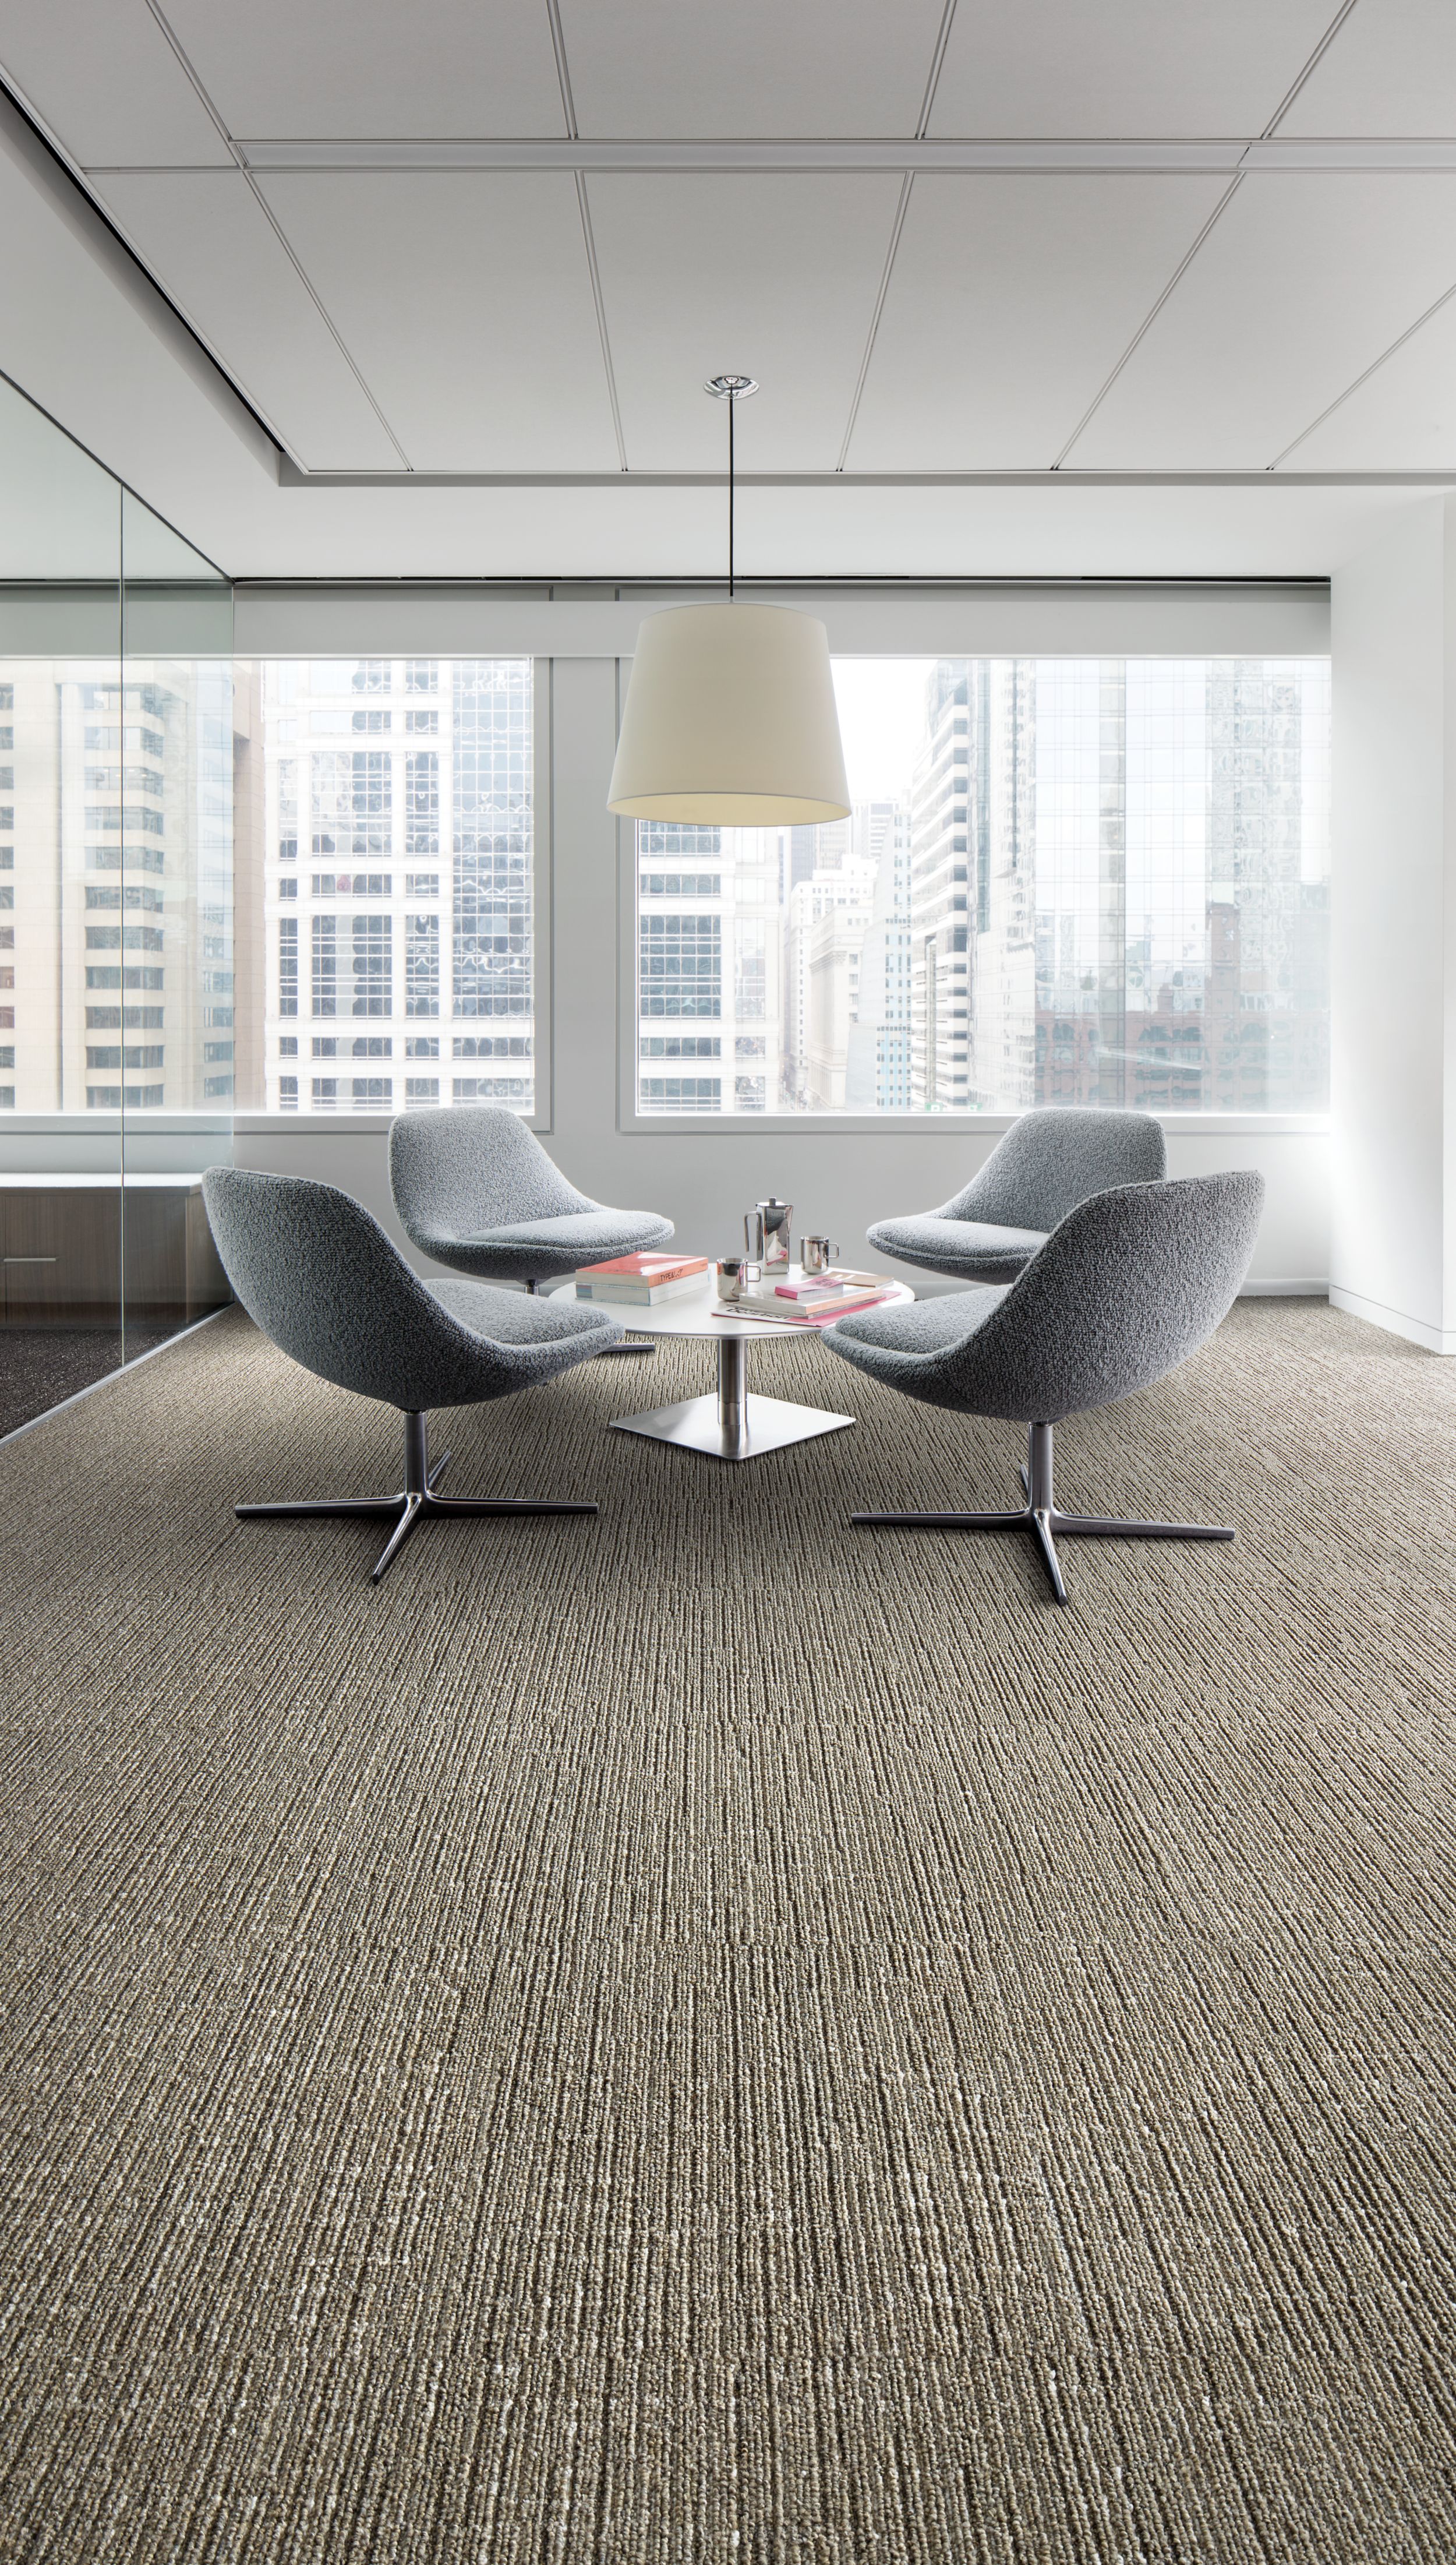 Interface Night Flight carpet tile in office sitting area with large windows and city view imagen número 8